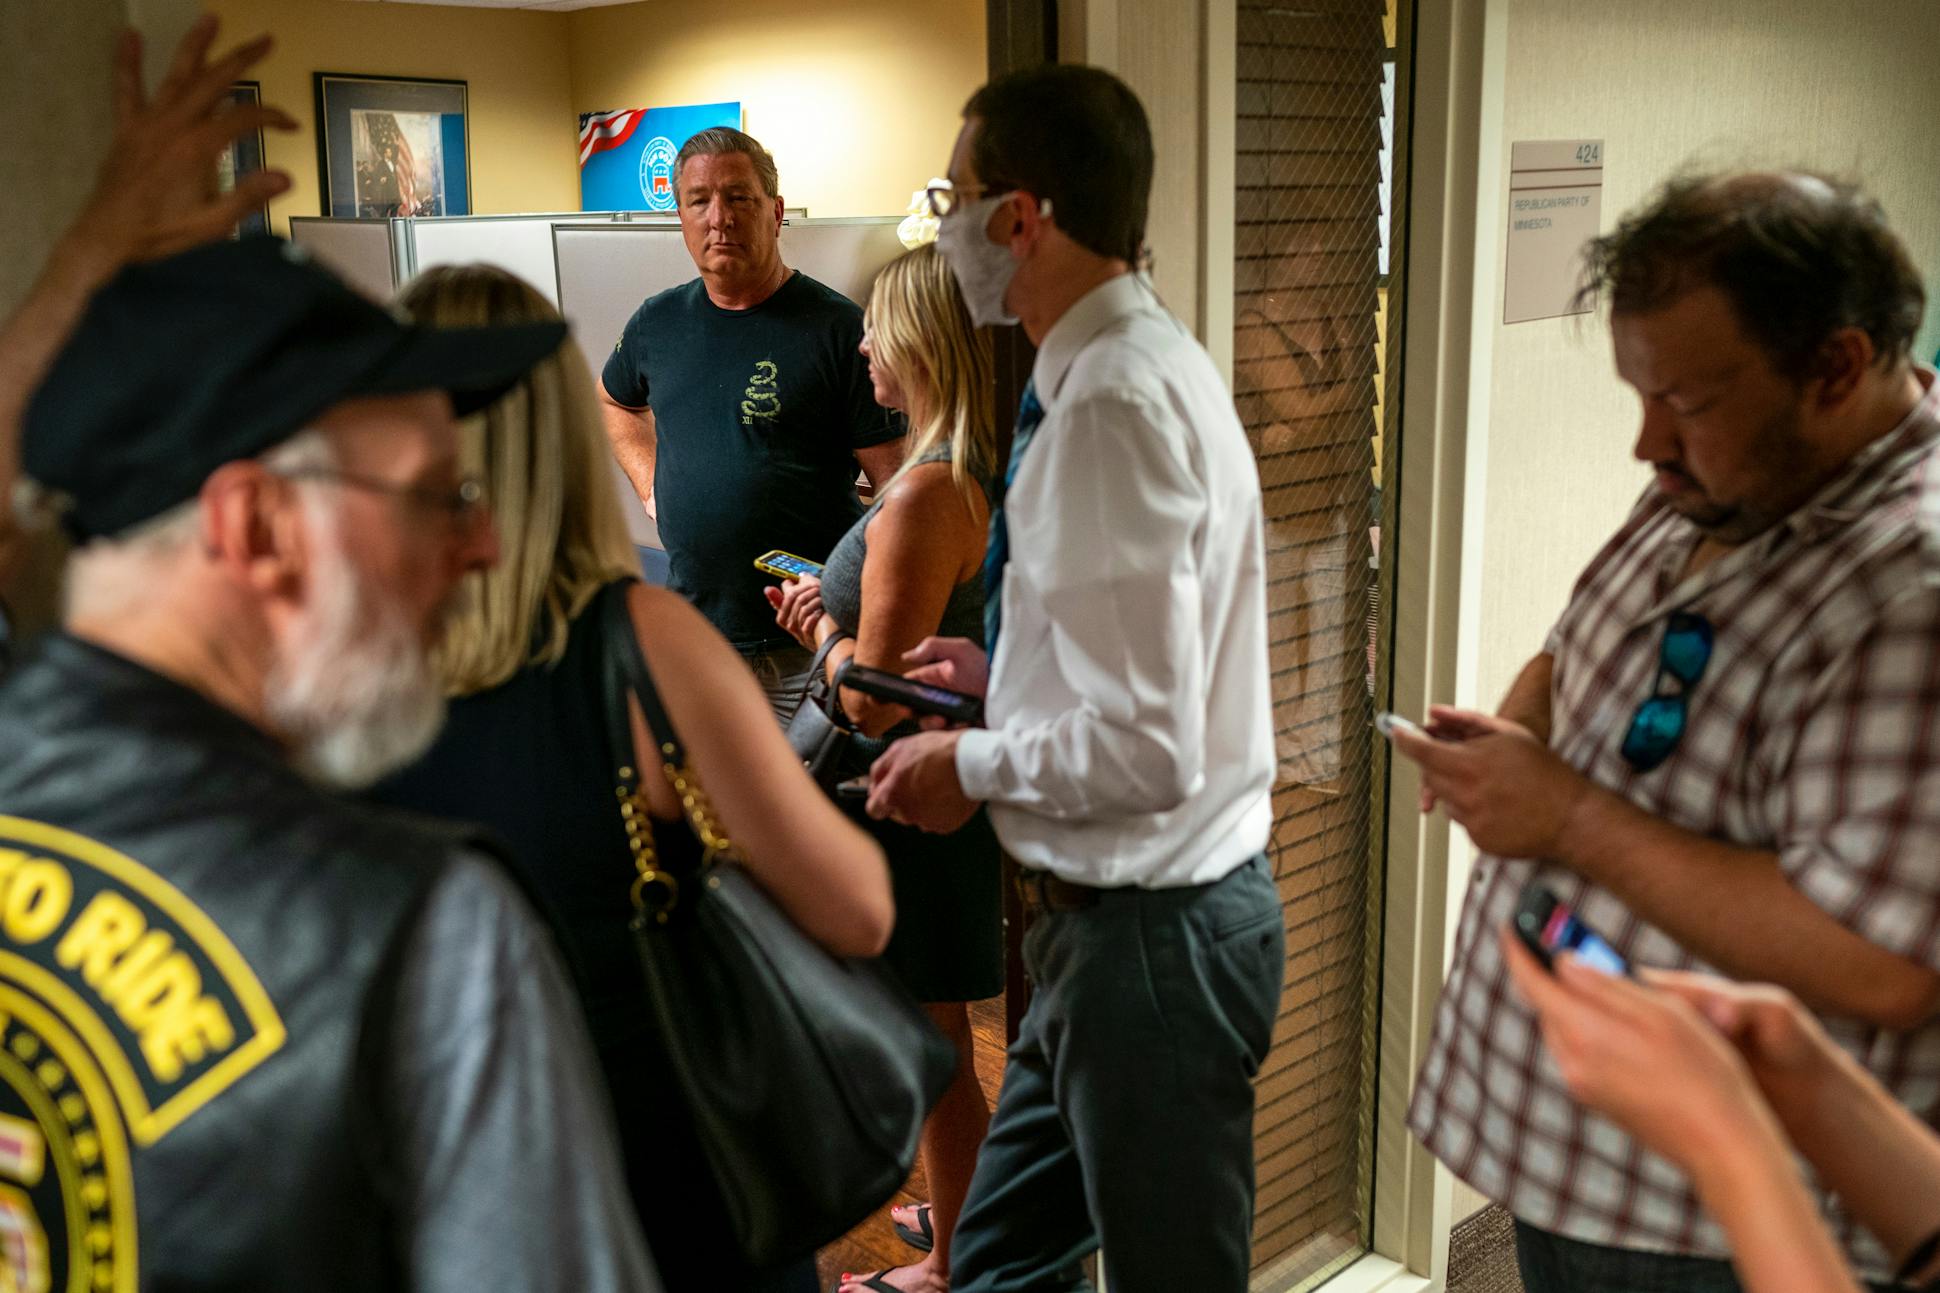 Mike Smith, center, along with a group of protestors and media, wait outside the meeting room of the Republican Party of Minnesota as the party's executive board met to force out Jennifer Carnahan as state party chair on Aug. 19, 2021, in Edina.